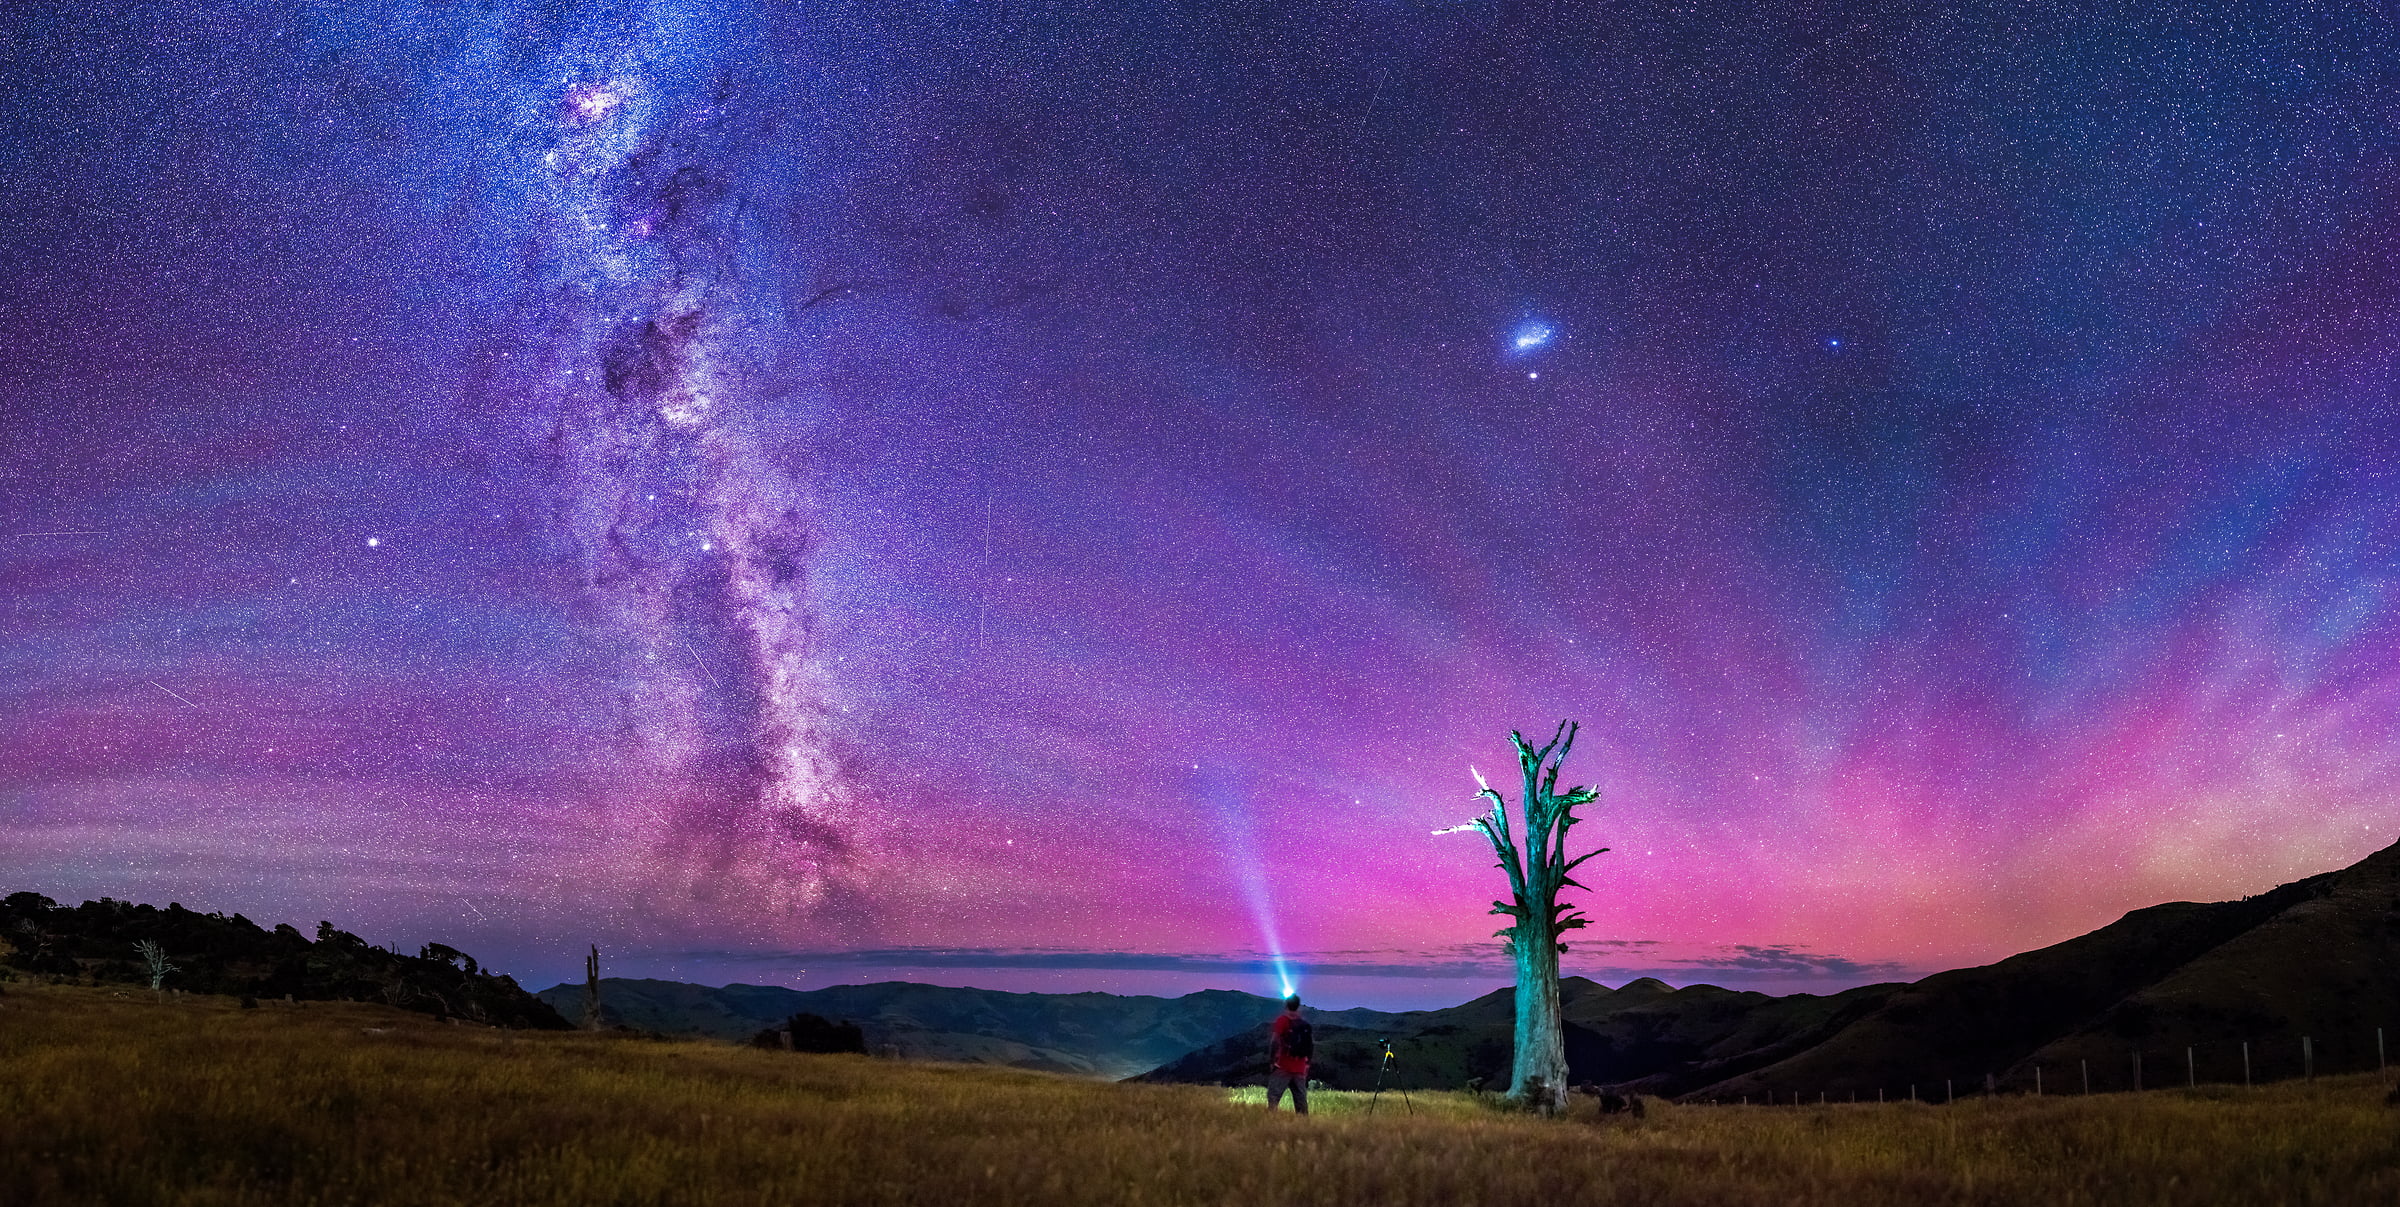 200 megapixels! A very high resolution, large-format VAST photo print of the night sky, milky way, and stars over a dead tree and a person photographing; fine art astrophotography landscape photo created by Paul Wilson in Port Levy Saddle, Canterbury, New Zealand.